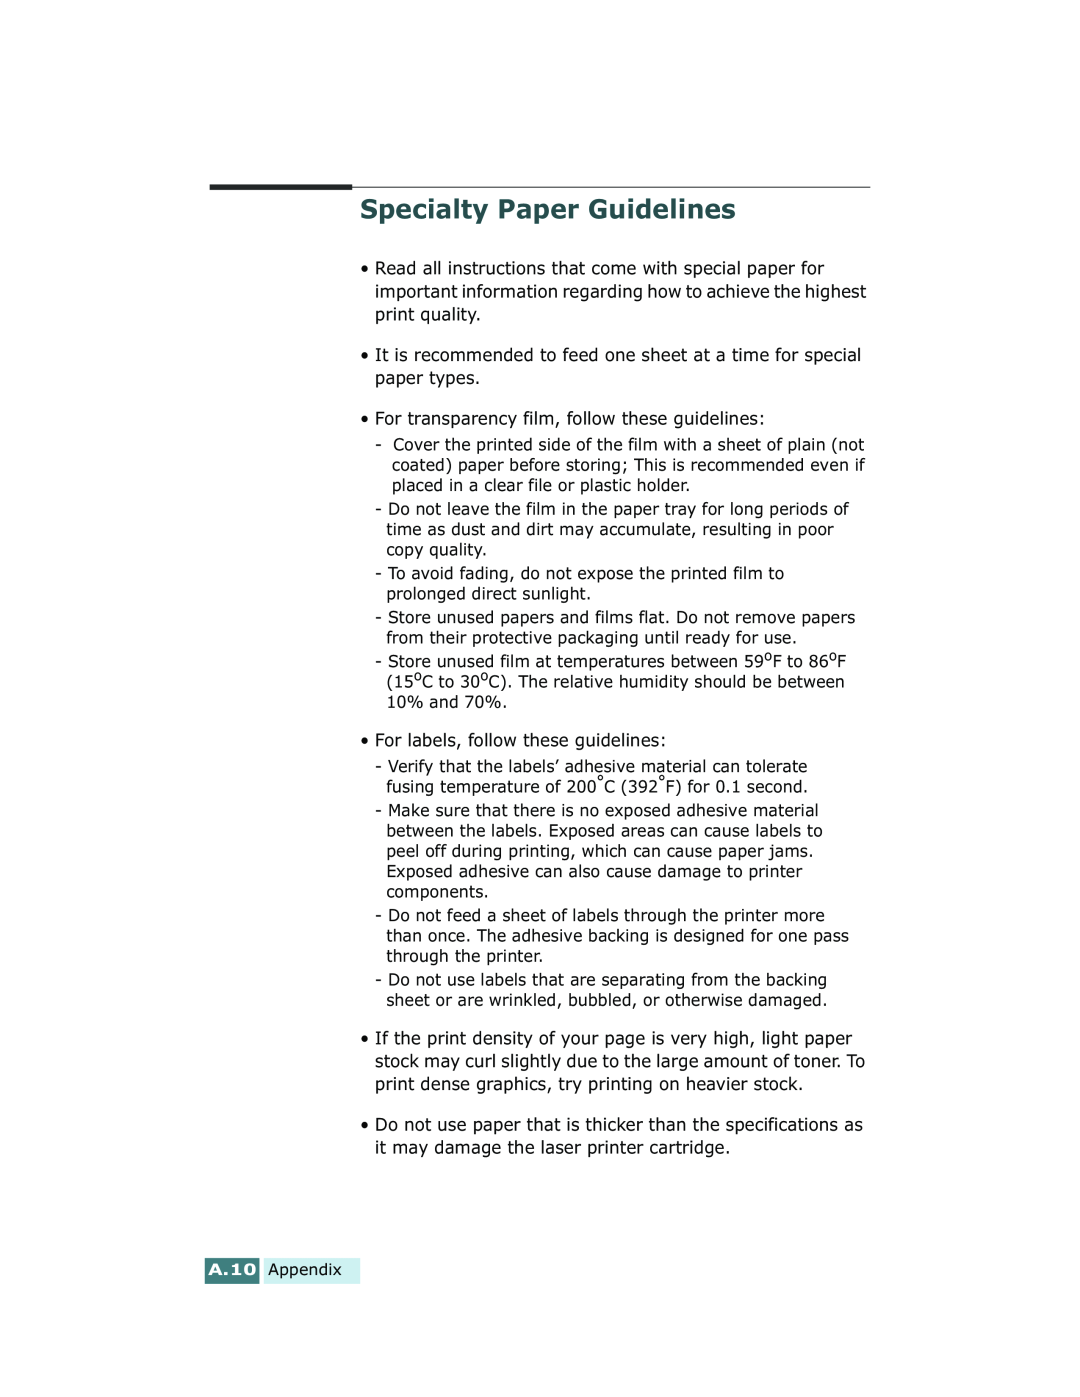 Xerox Pro 580 manual Specialty Paper Guidelines 